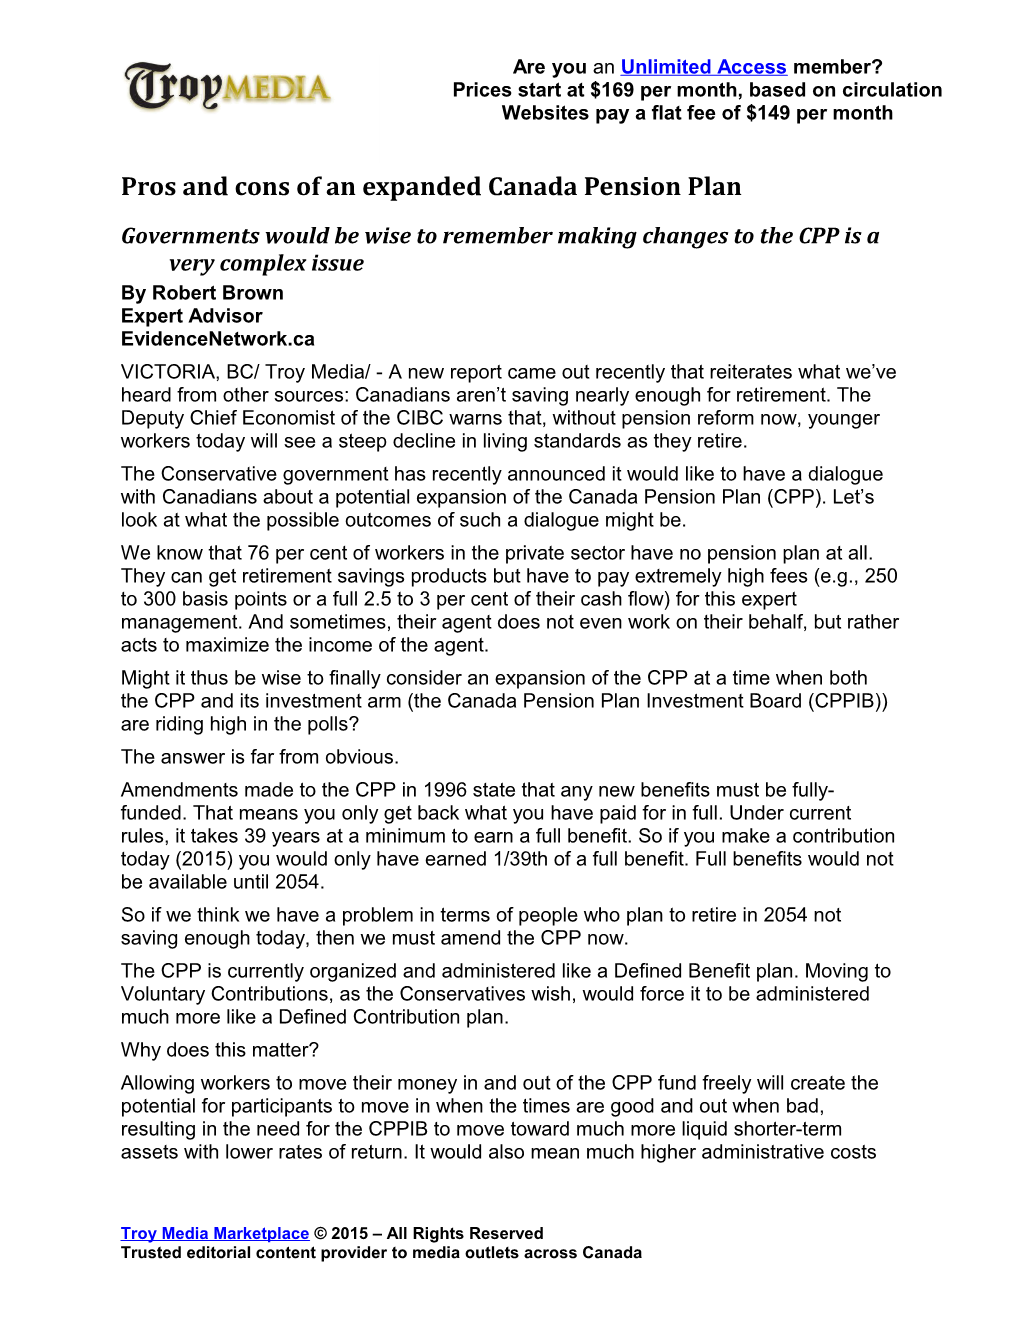 Pros and Cons of an Expanded Canada Pension Plan